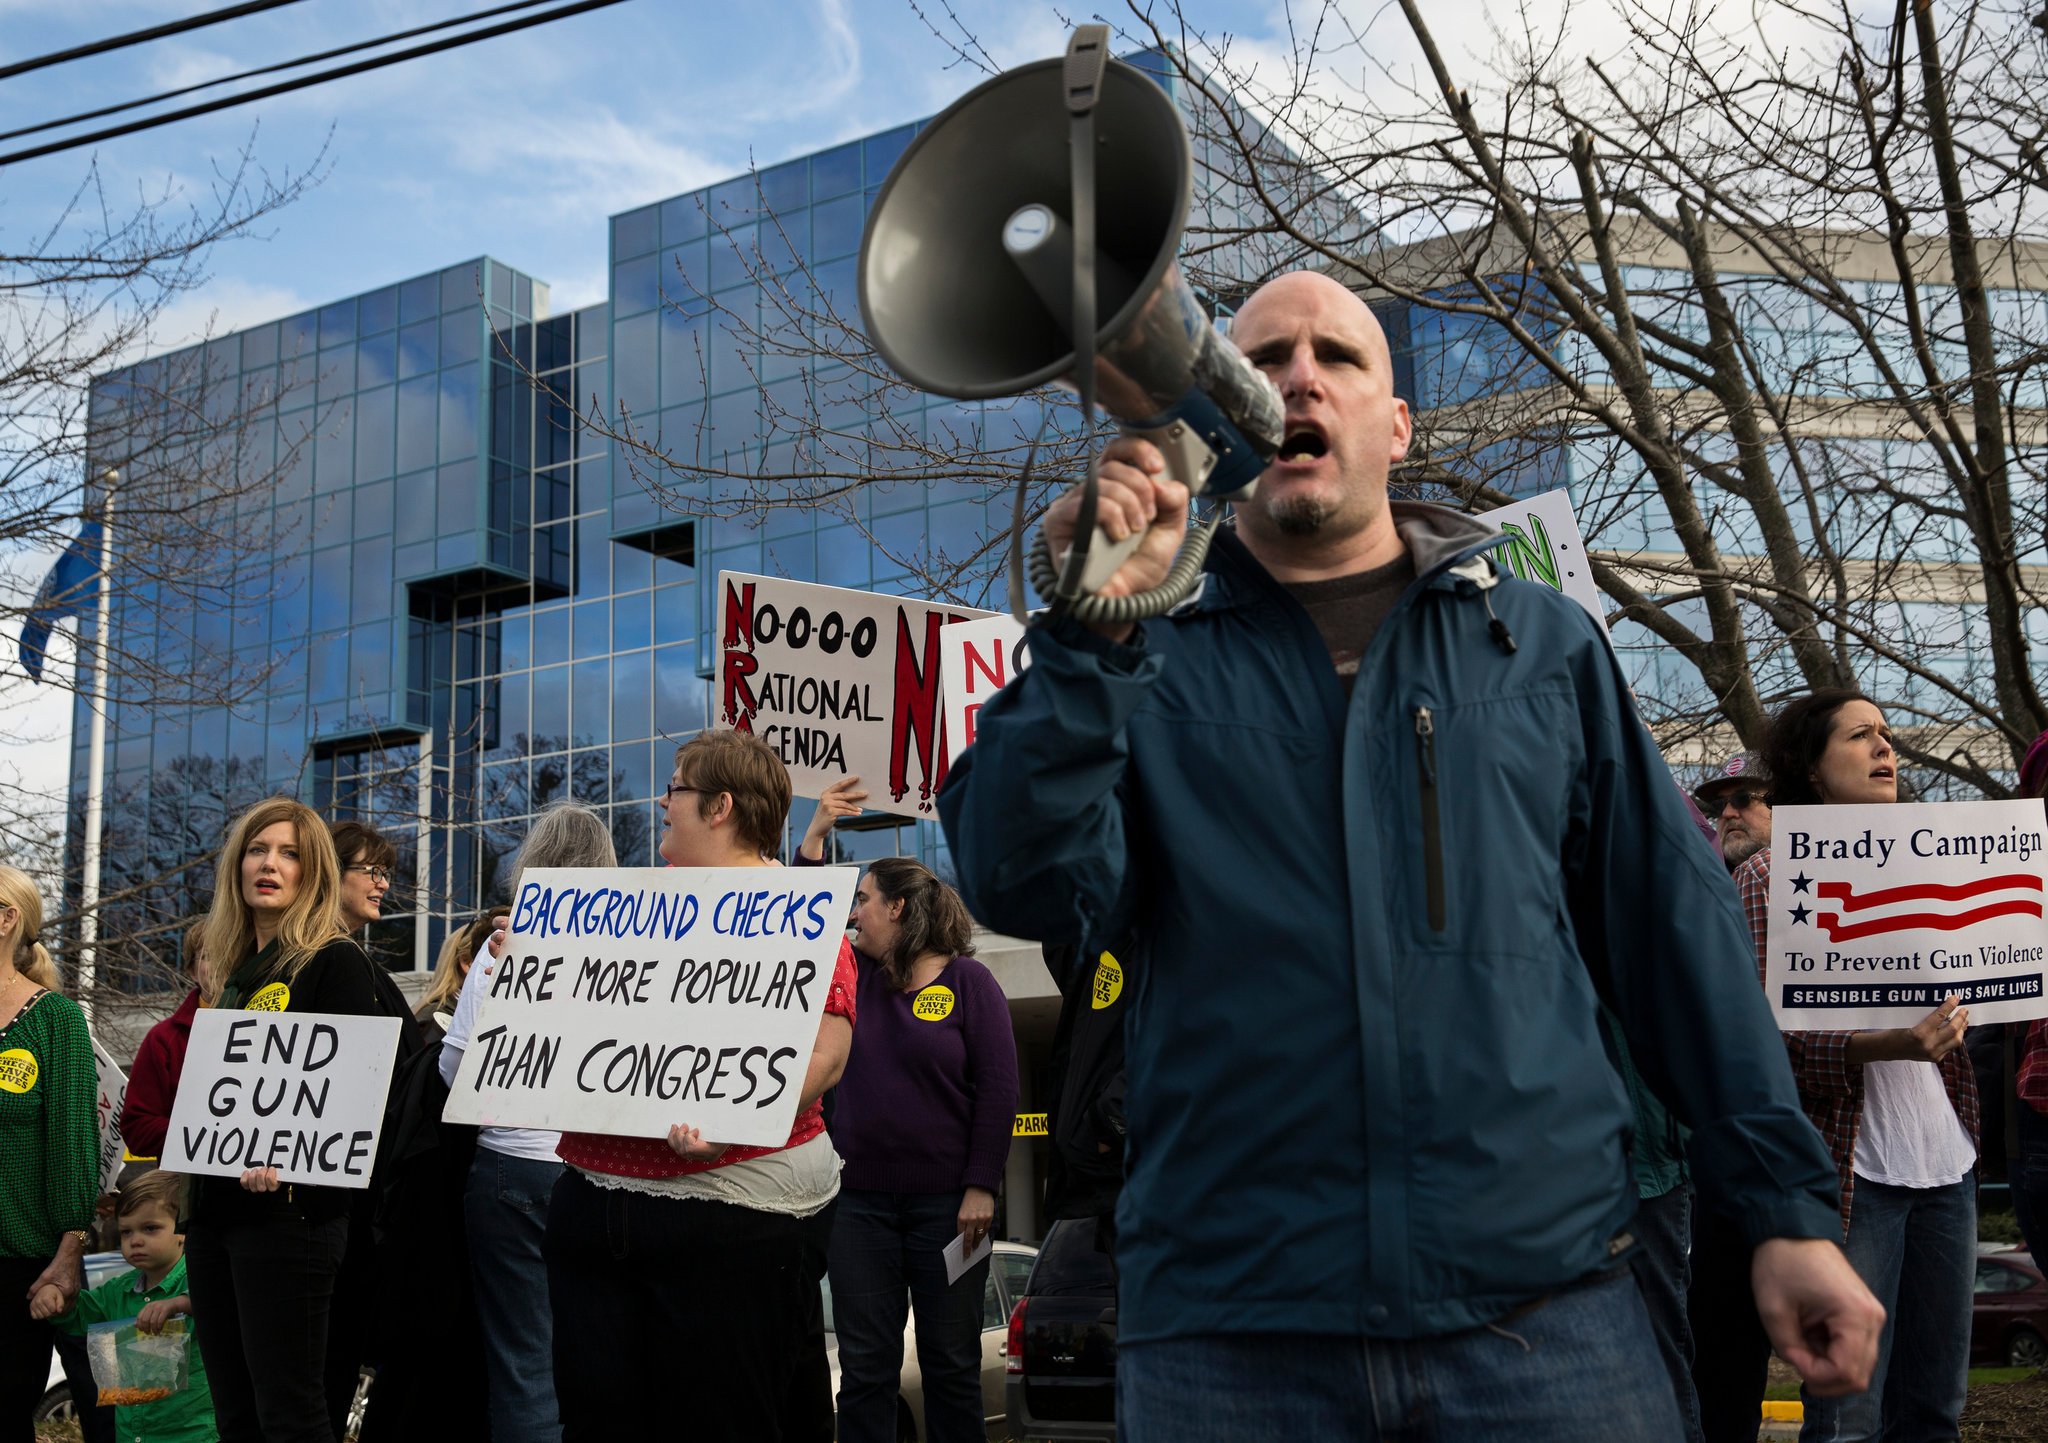 Gun control advocates protesting outside the National Rifle Association in 2015 (Photo Credit: Drew Angerer for the New York Times)